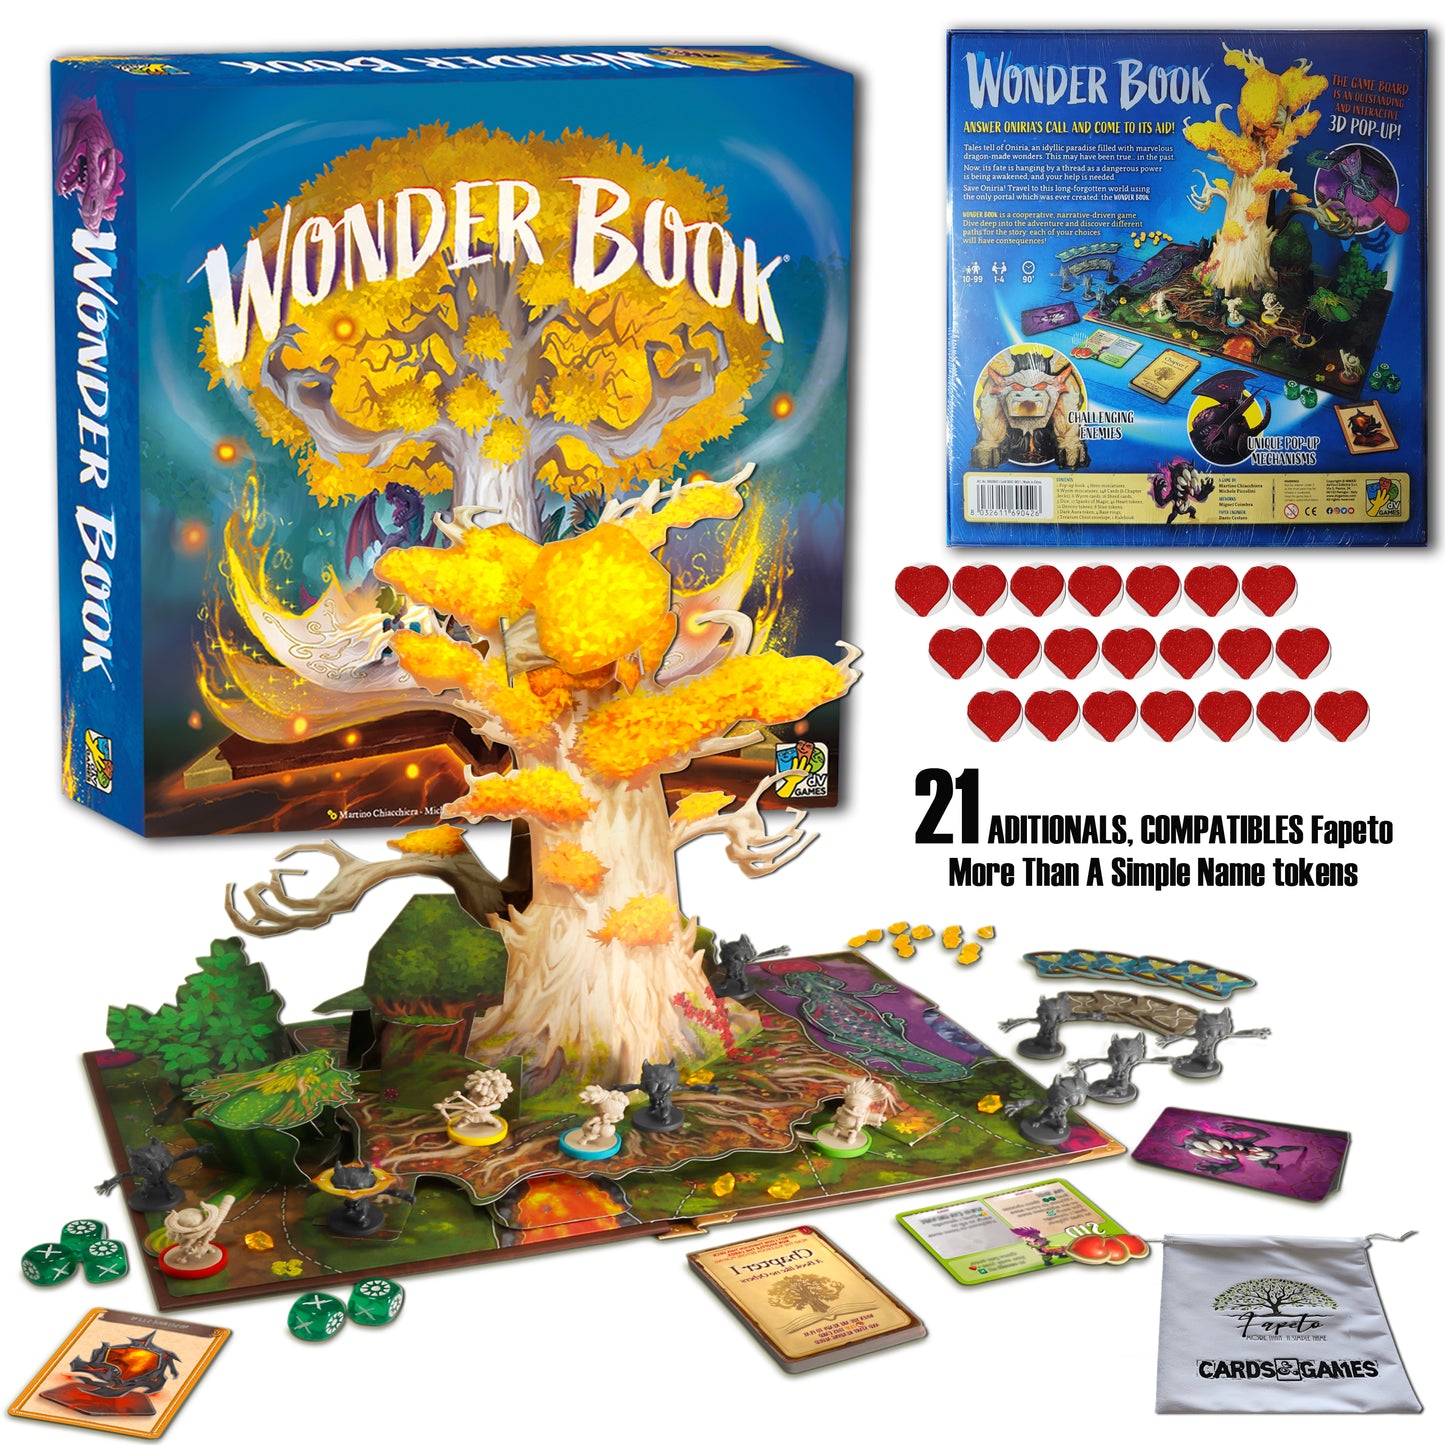 Cooperative Campaing StoryBook of The world of Oniria Board Game Bundle With Random Color Drawstring Bag Plus 21 Hearts COMPATIBLES Upgraded Tokens